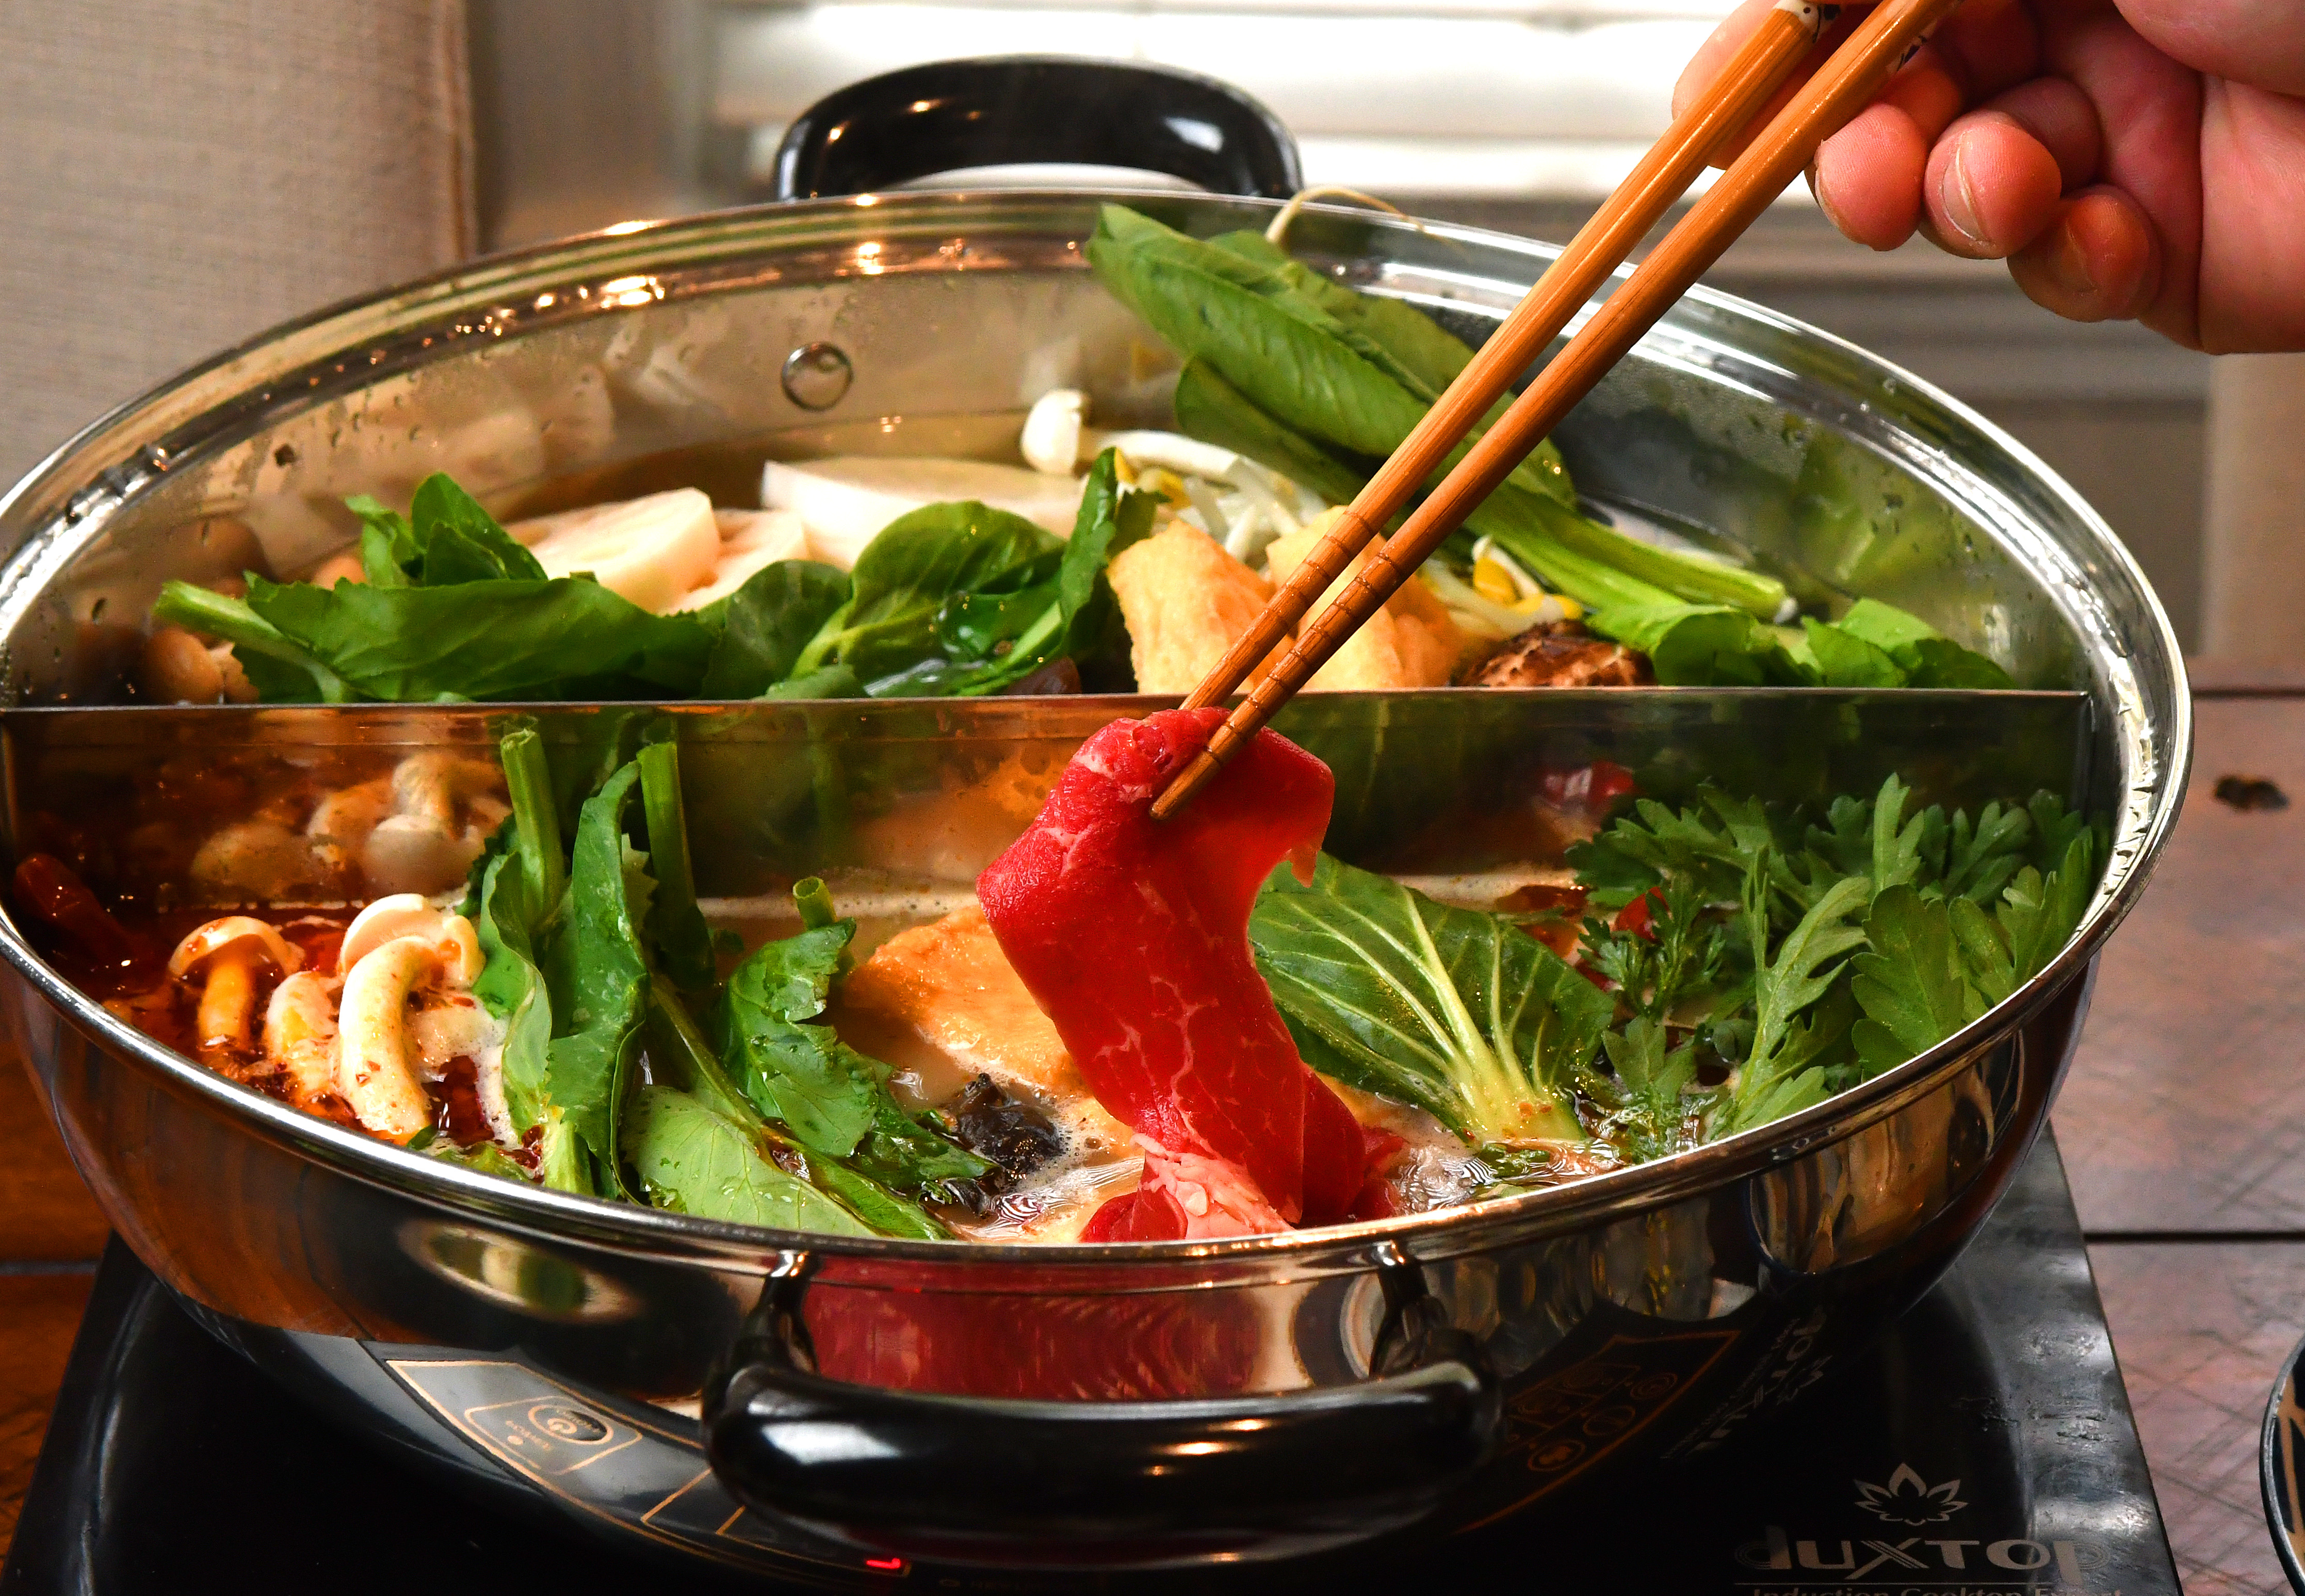 RECIPES: With hot pot, anything goes — spicy or plain, rich or vegan  friendly